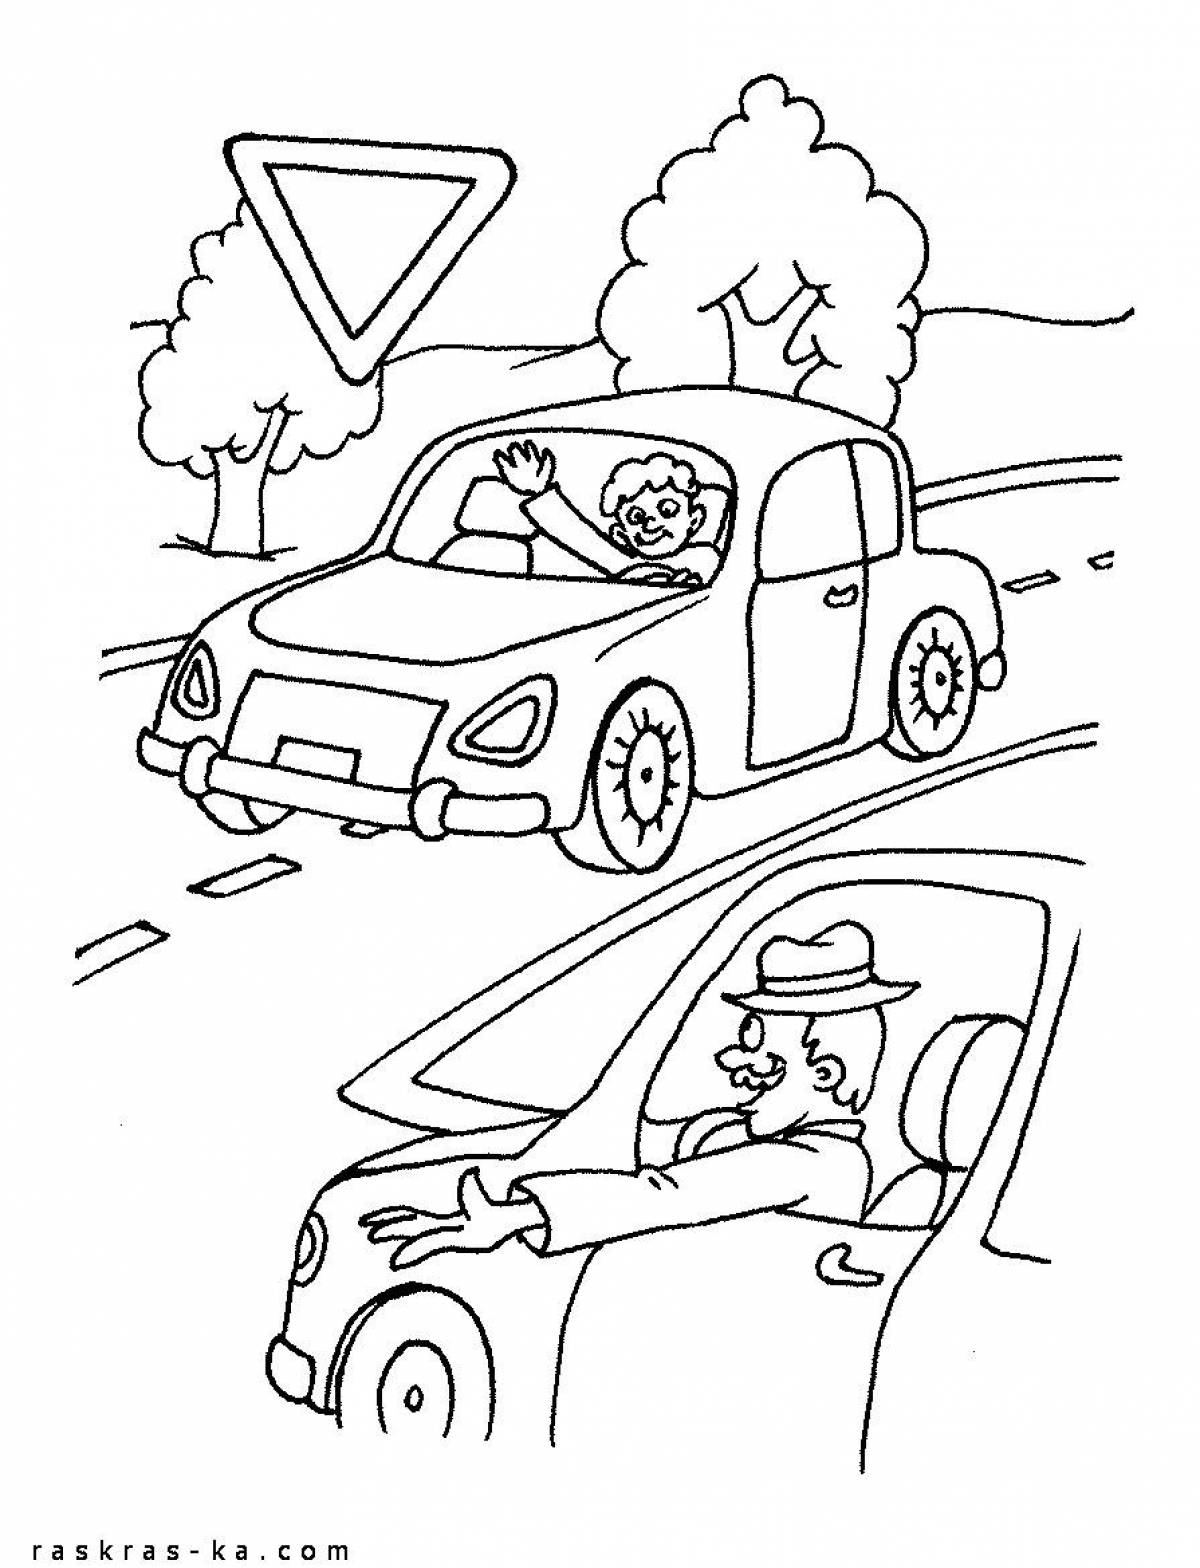 Coloring pages of the rules of the road for children